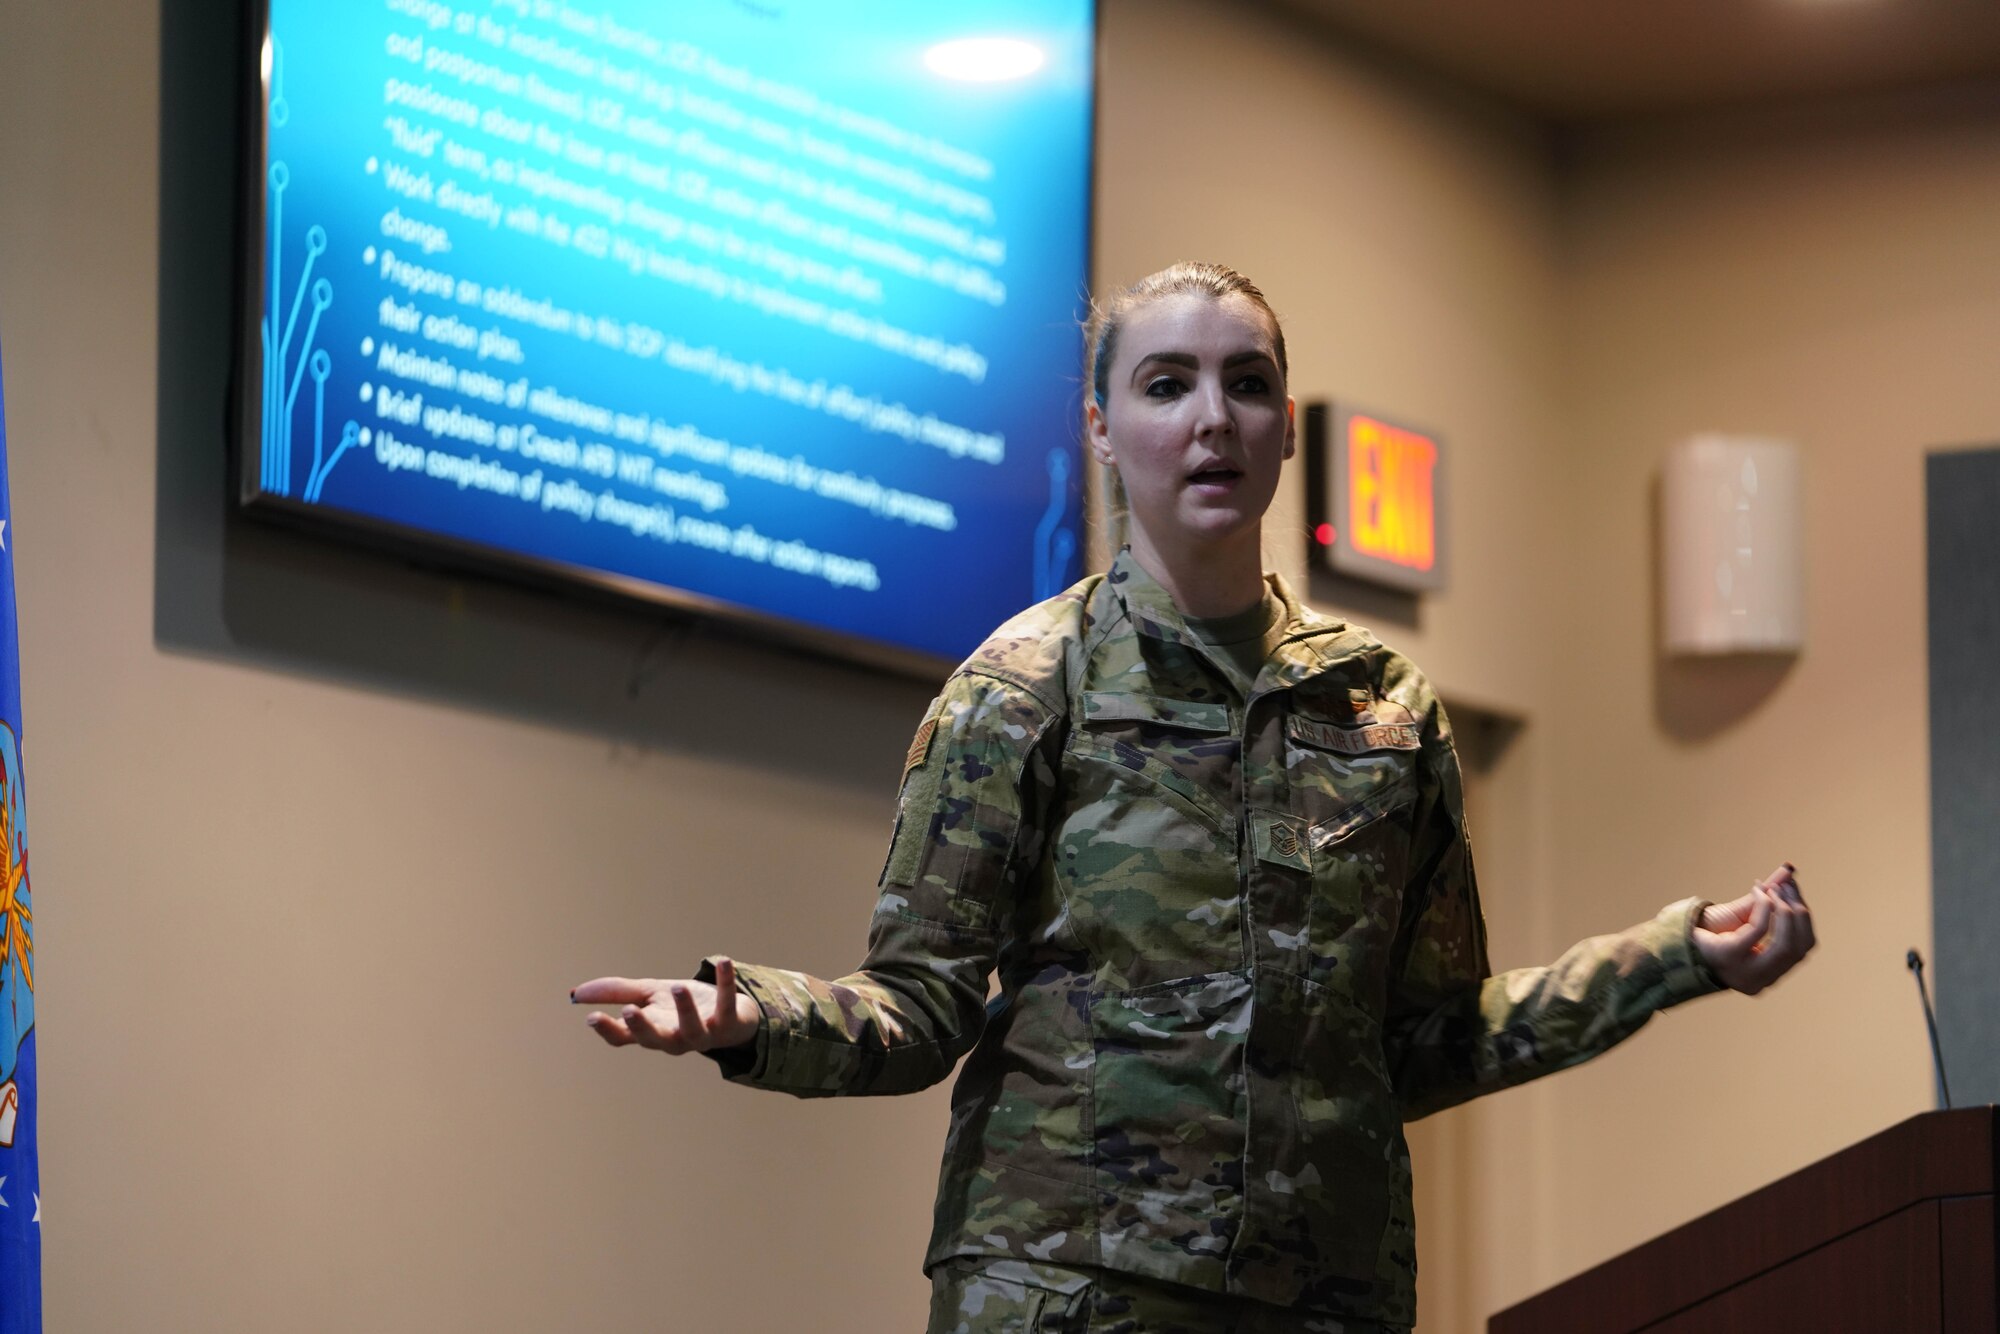 U.S. Air Force Master Sgt. Megan, team lead for the 432nd Wing chapter of the Women's Initiative Team (WIT), addresses the audience at the chapter's inaugural meeting at Creech Air Force Base, Nevada, Oct. 26, 2022. The WIT is composed of volunteers dedicated to identifying and eliminating barriers to women’s service in the Department of the Air Force and Department of Defense while building a community of leadership and a network of allies and support agencies. (U.S. Air Force photo by Airman 1st Class Ariel O'Shea)